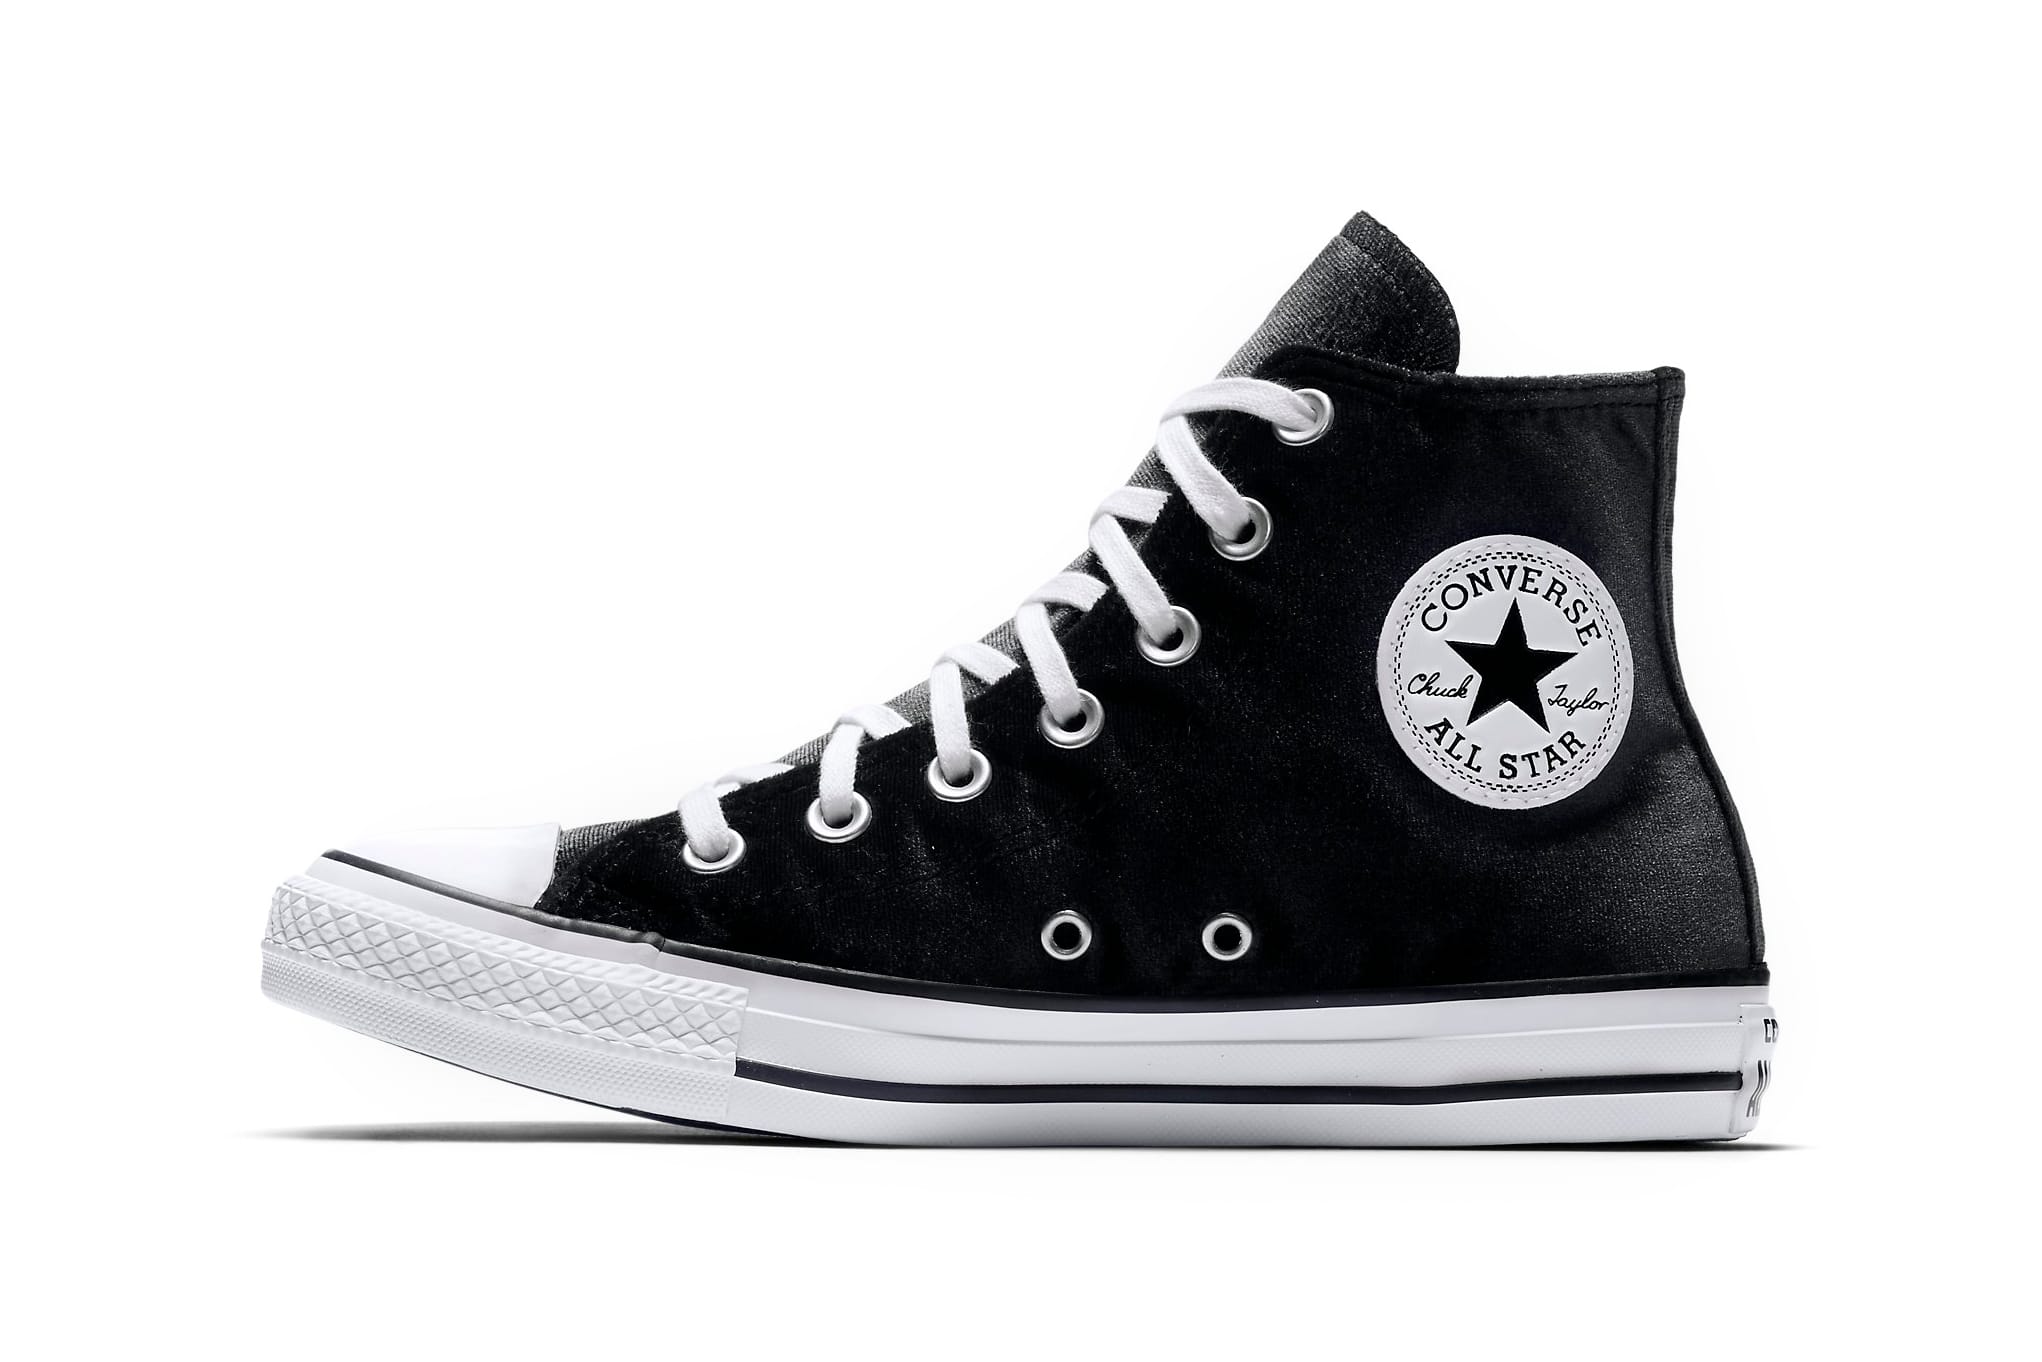 Converse Chuck Taylor All Star Is Black 